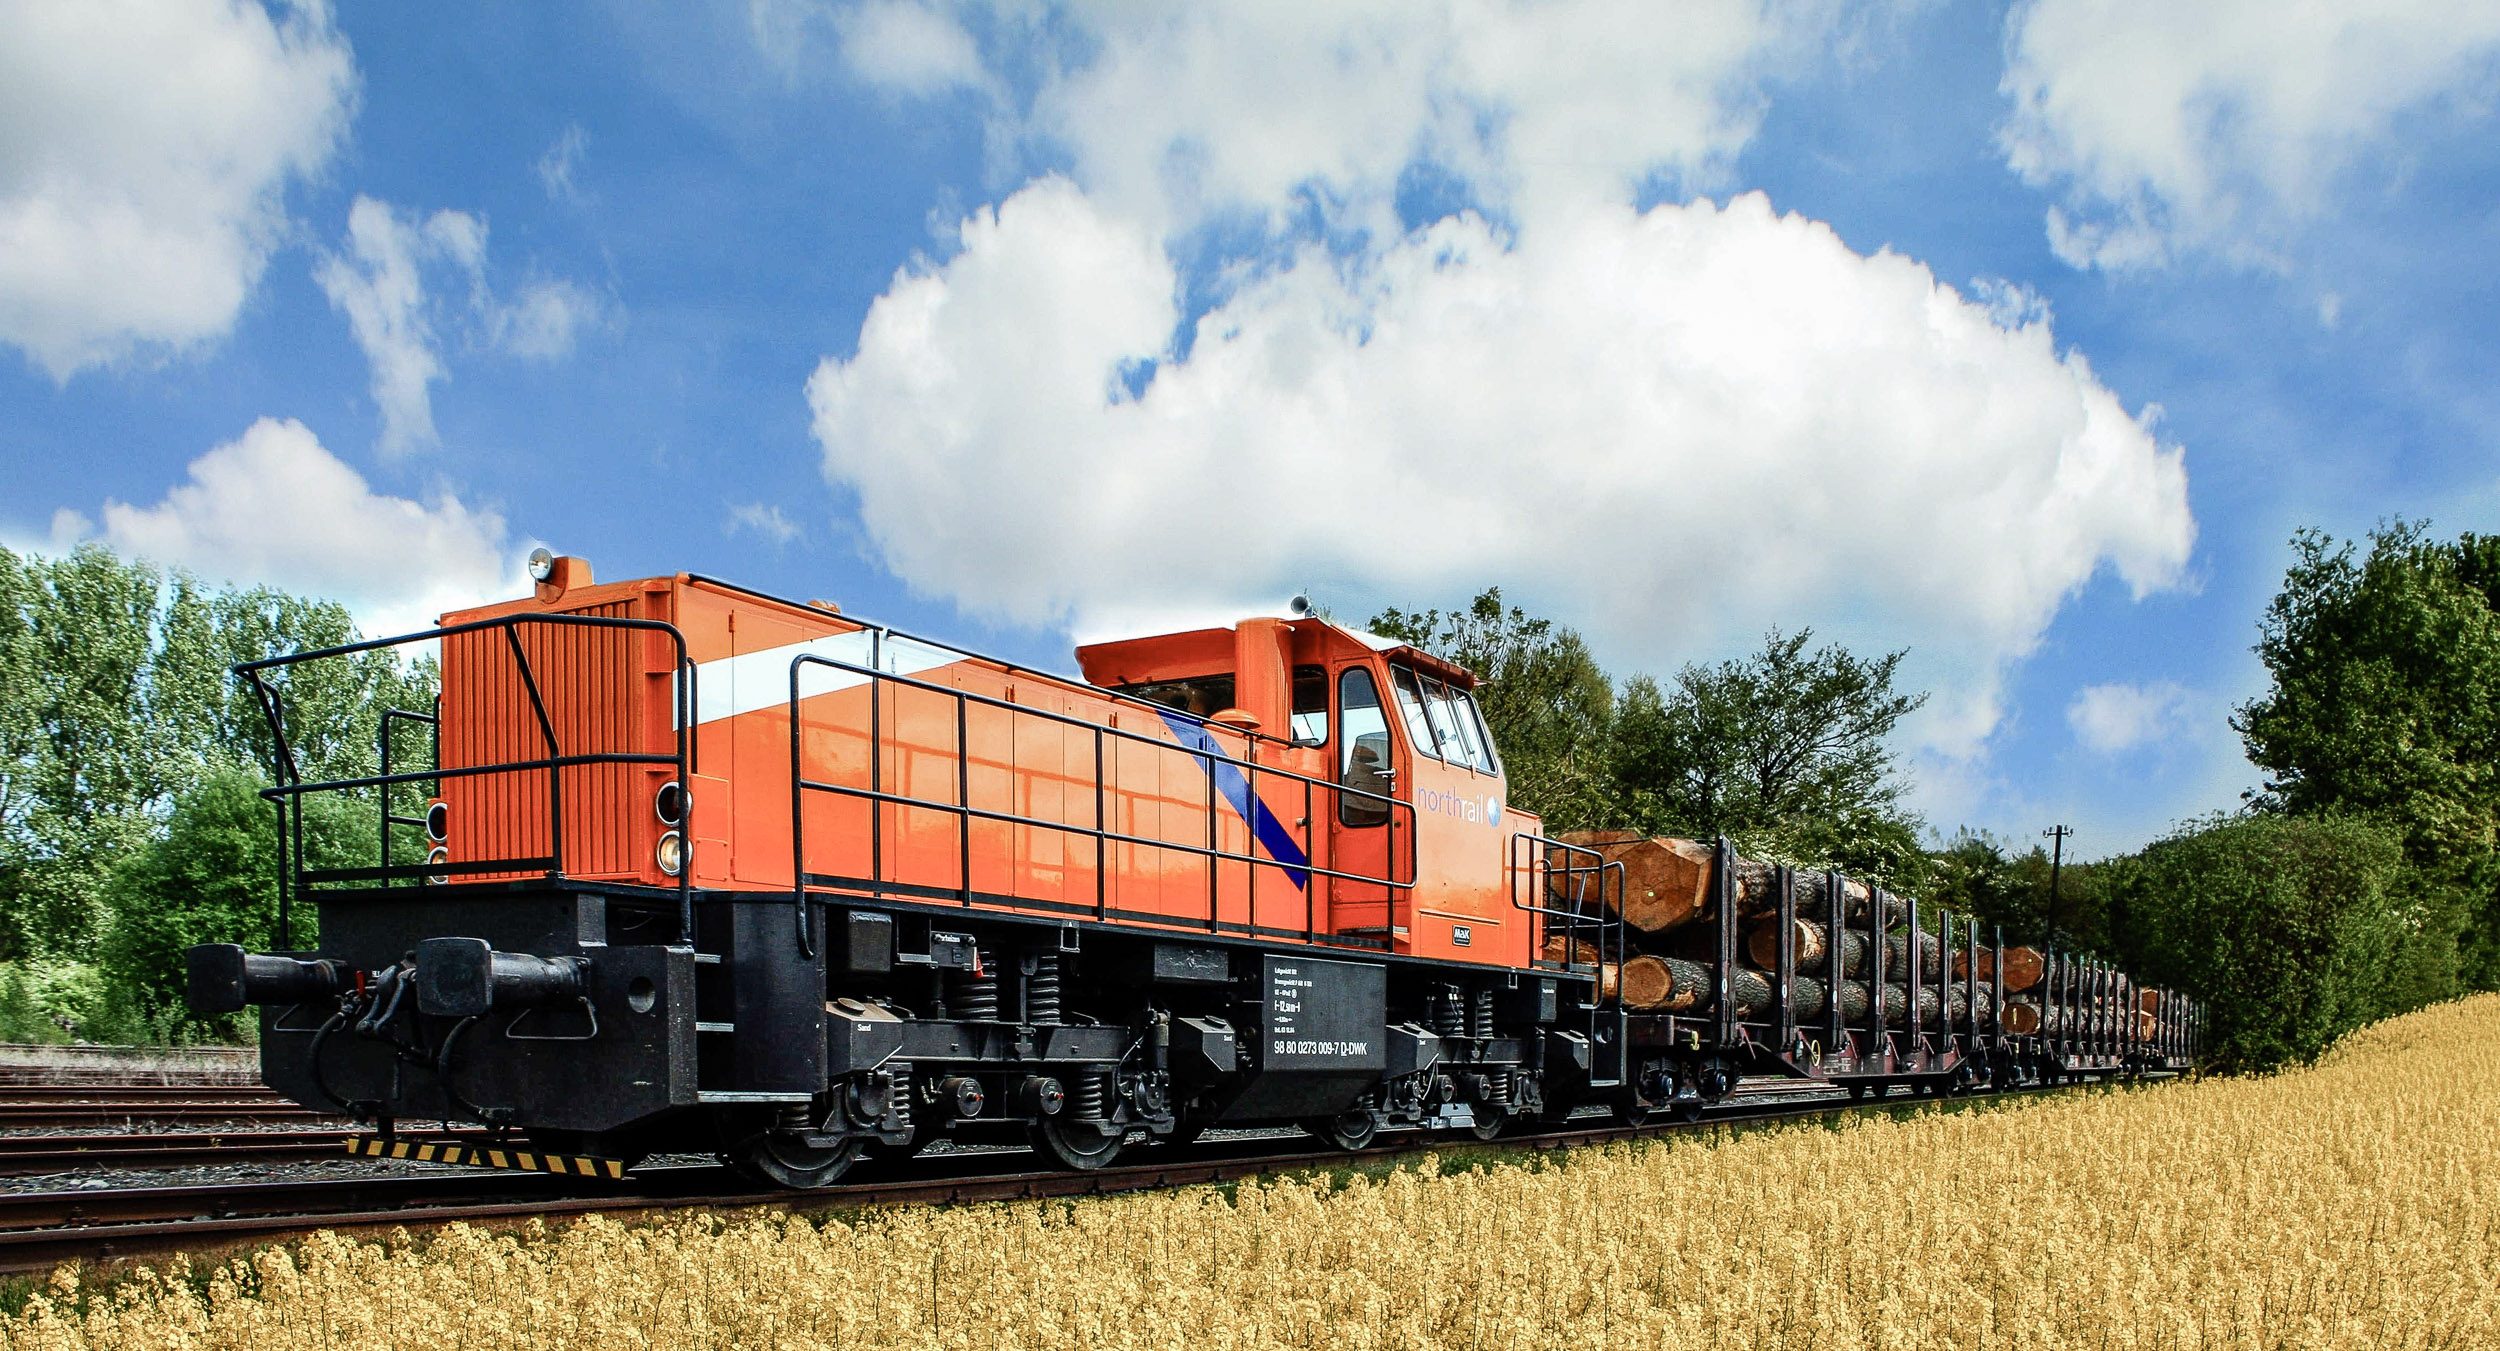 Northrail locomotive with goods wagons